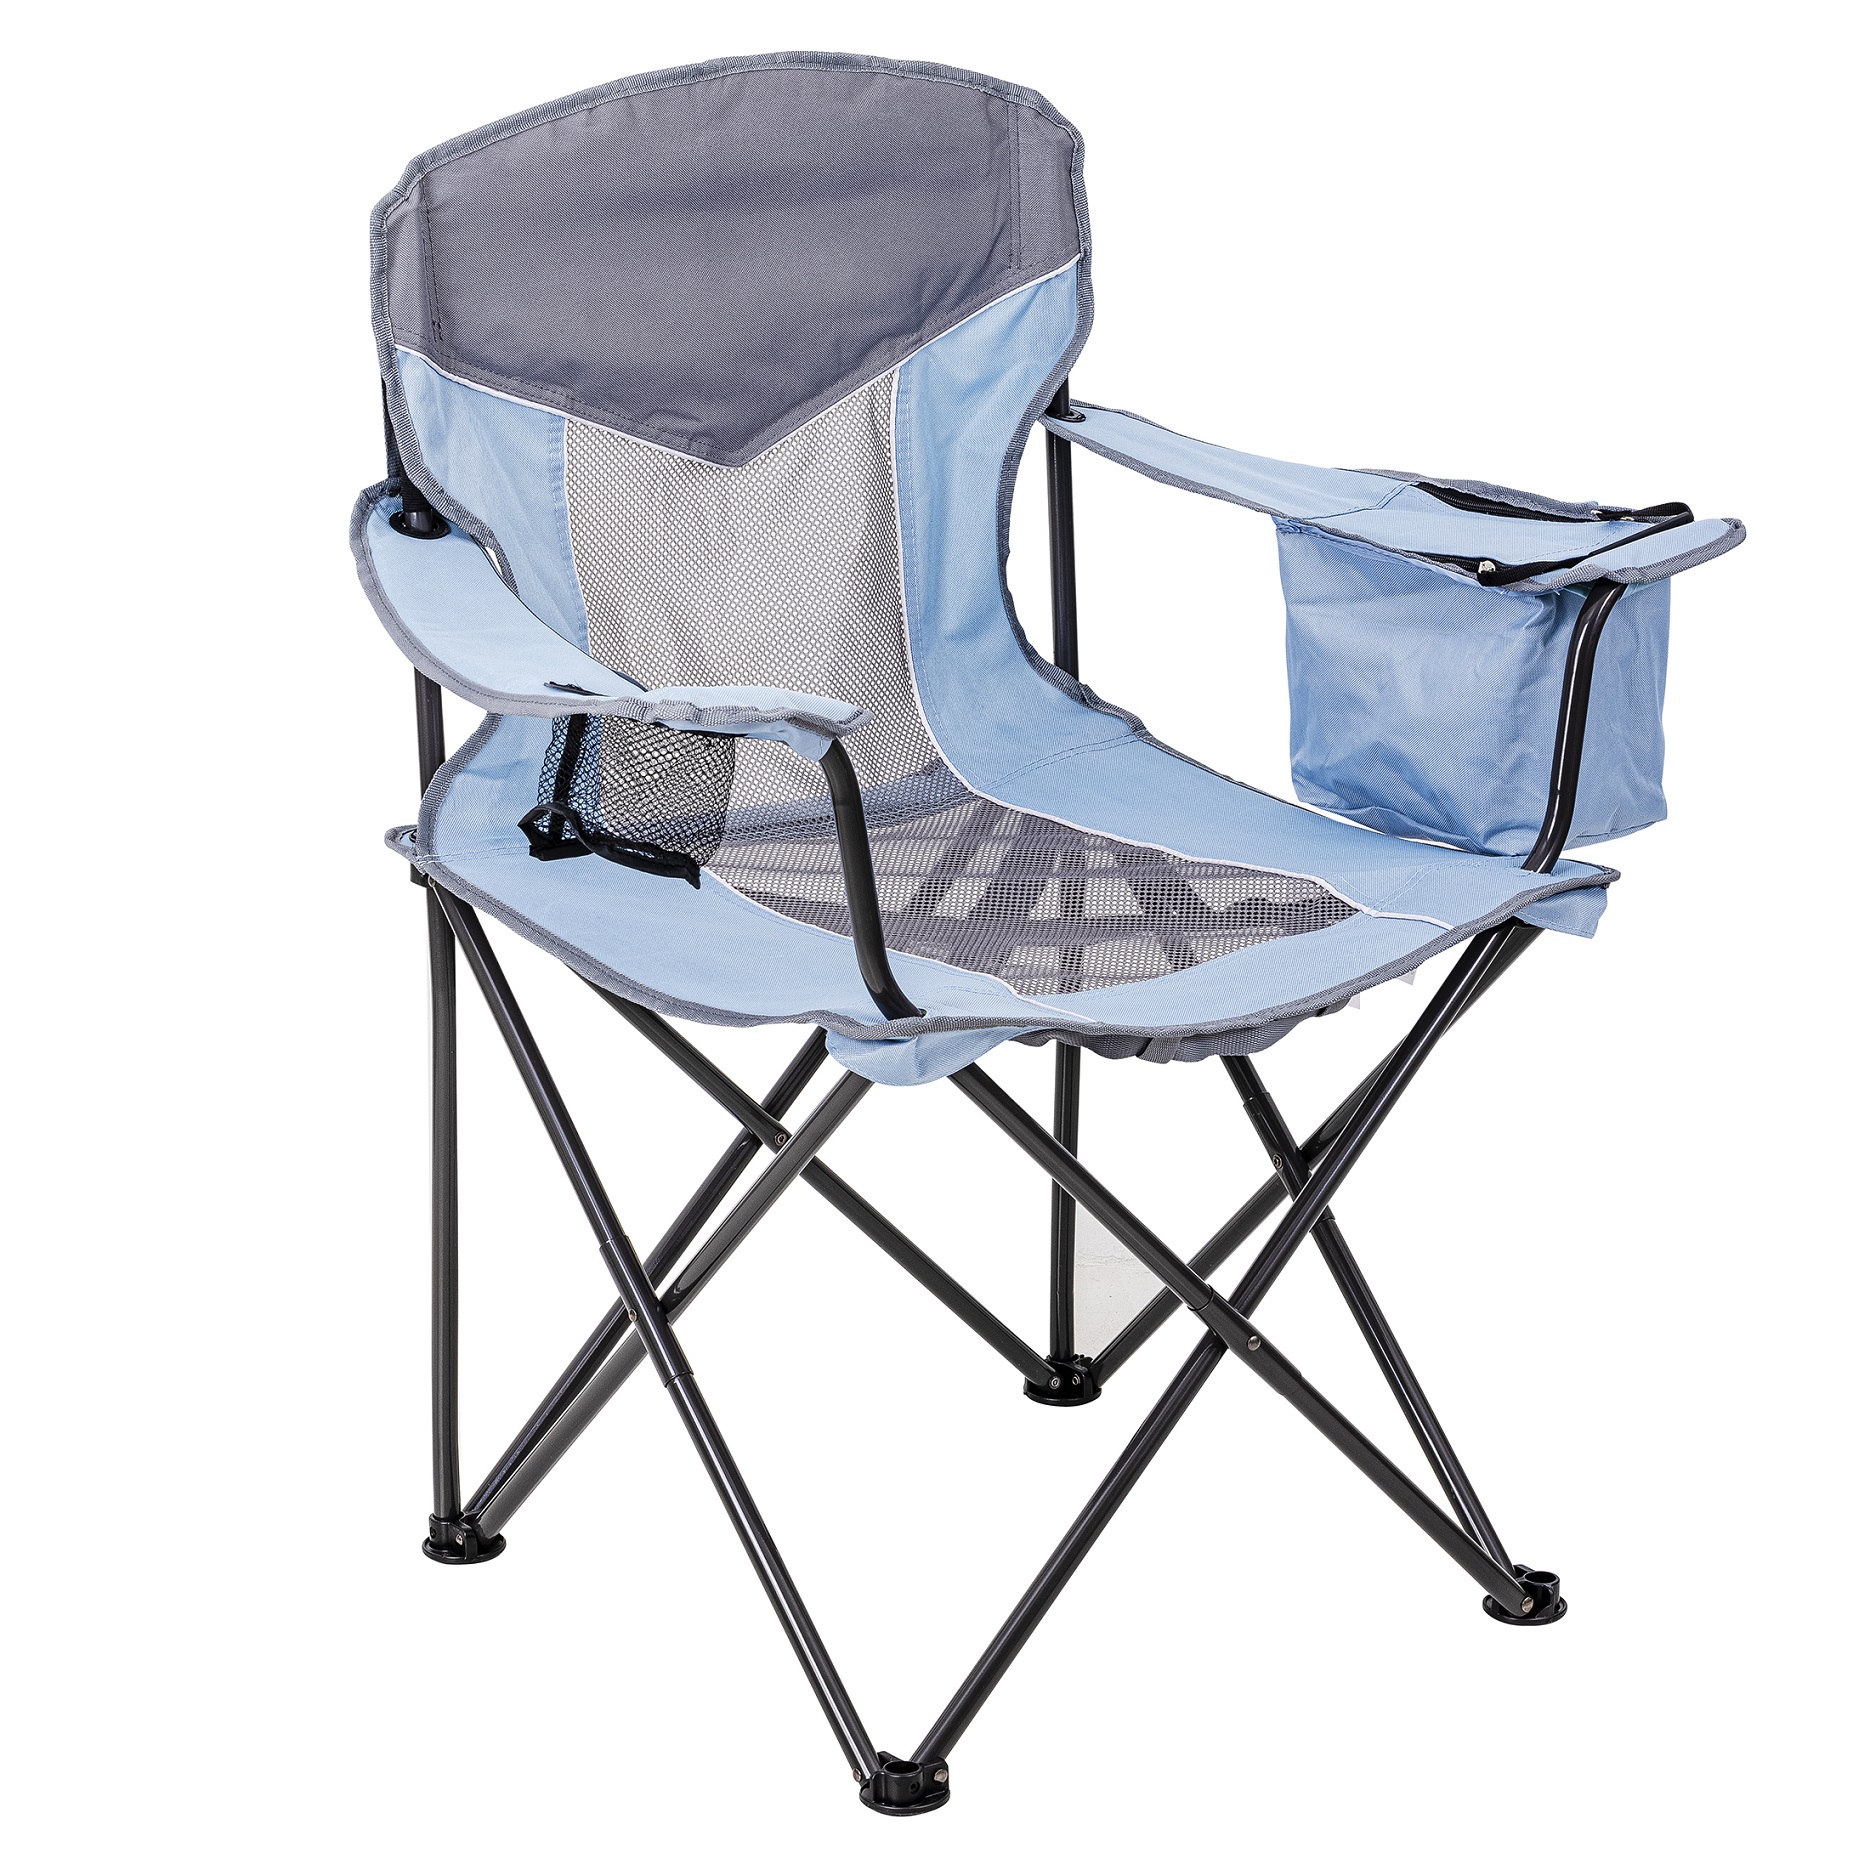 Ozark Trail Oversized Mesh Camp Chair with Cooler, Blue/Aqua and Grey, Adult - image 3 of 9